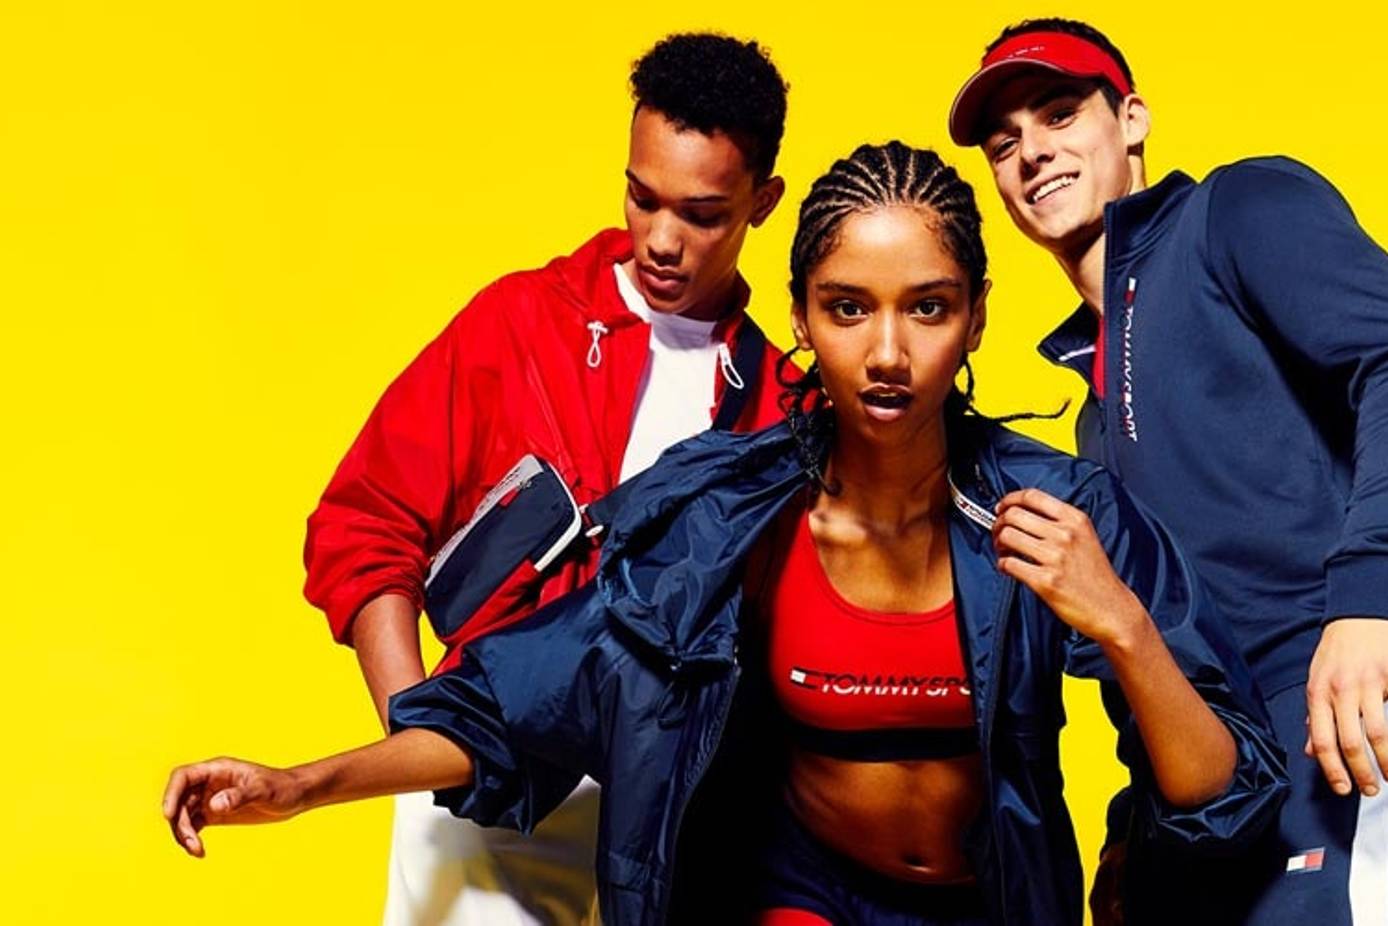 In pictures: Tommy Hilfiger launches Tommy sport, its first sportswear  apparel line